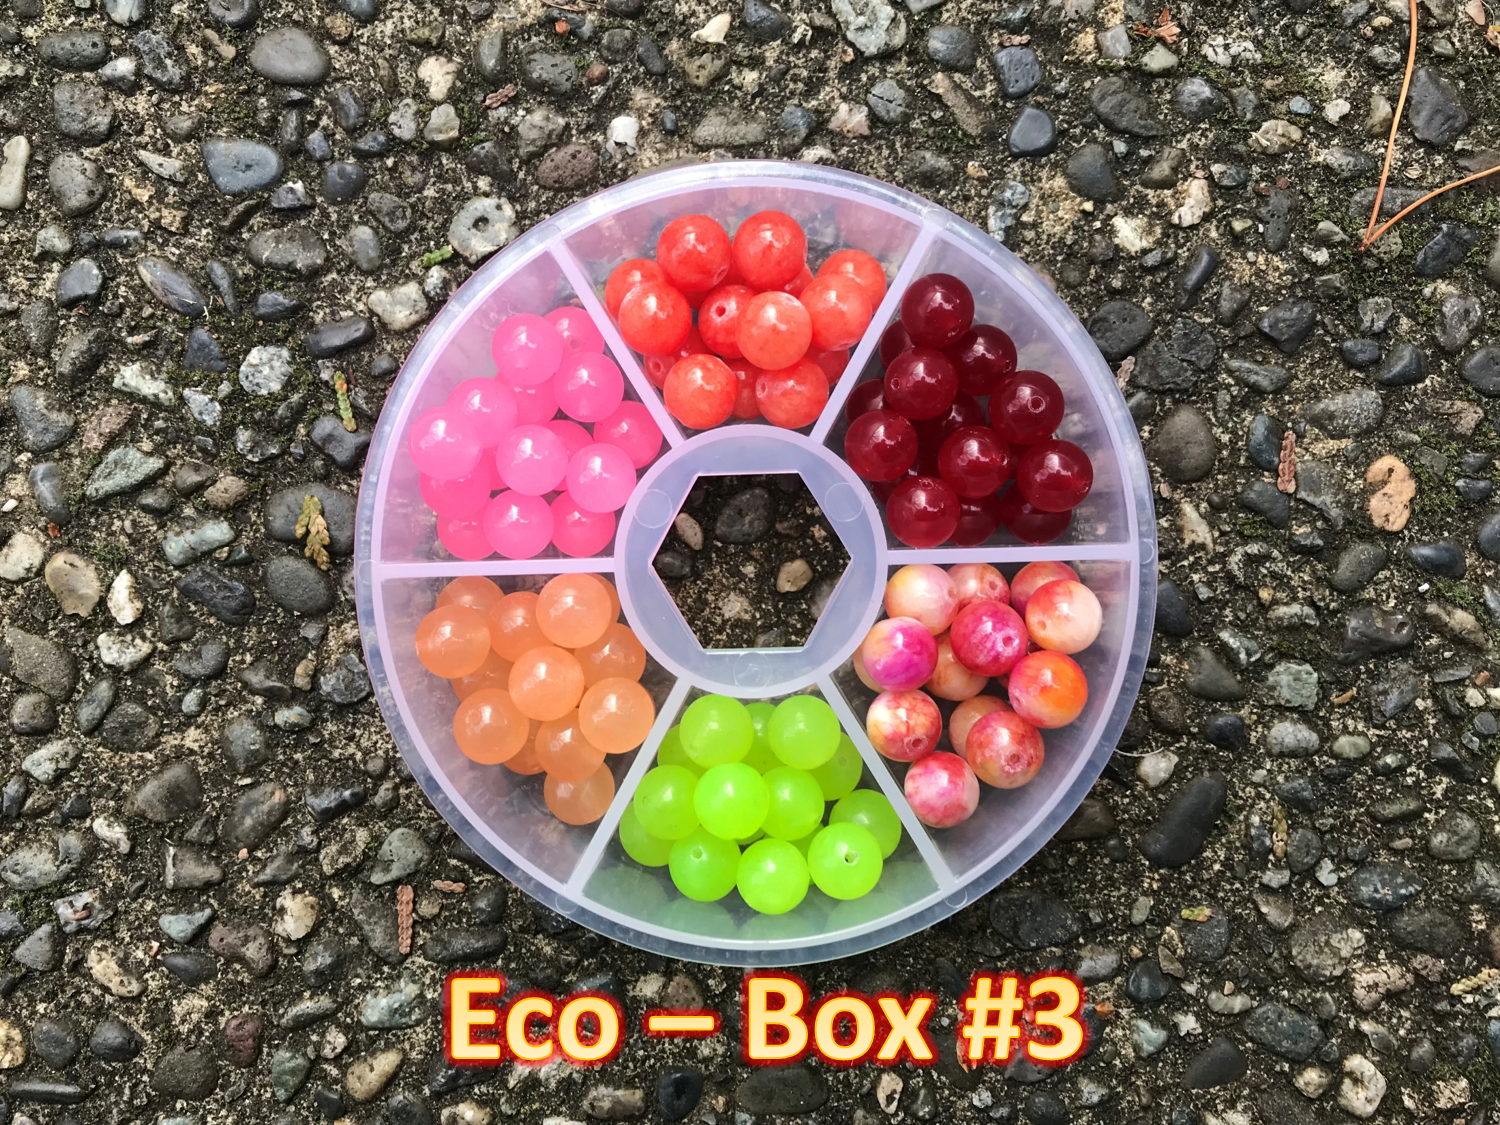 6 Color - 90 Count - 10mm Fishing Bead Wheel Combo Packs - Stone Cold Fishing  Beads